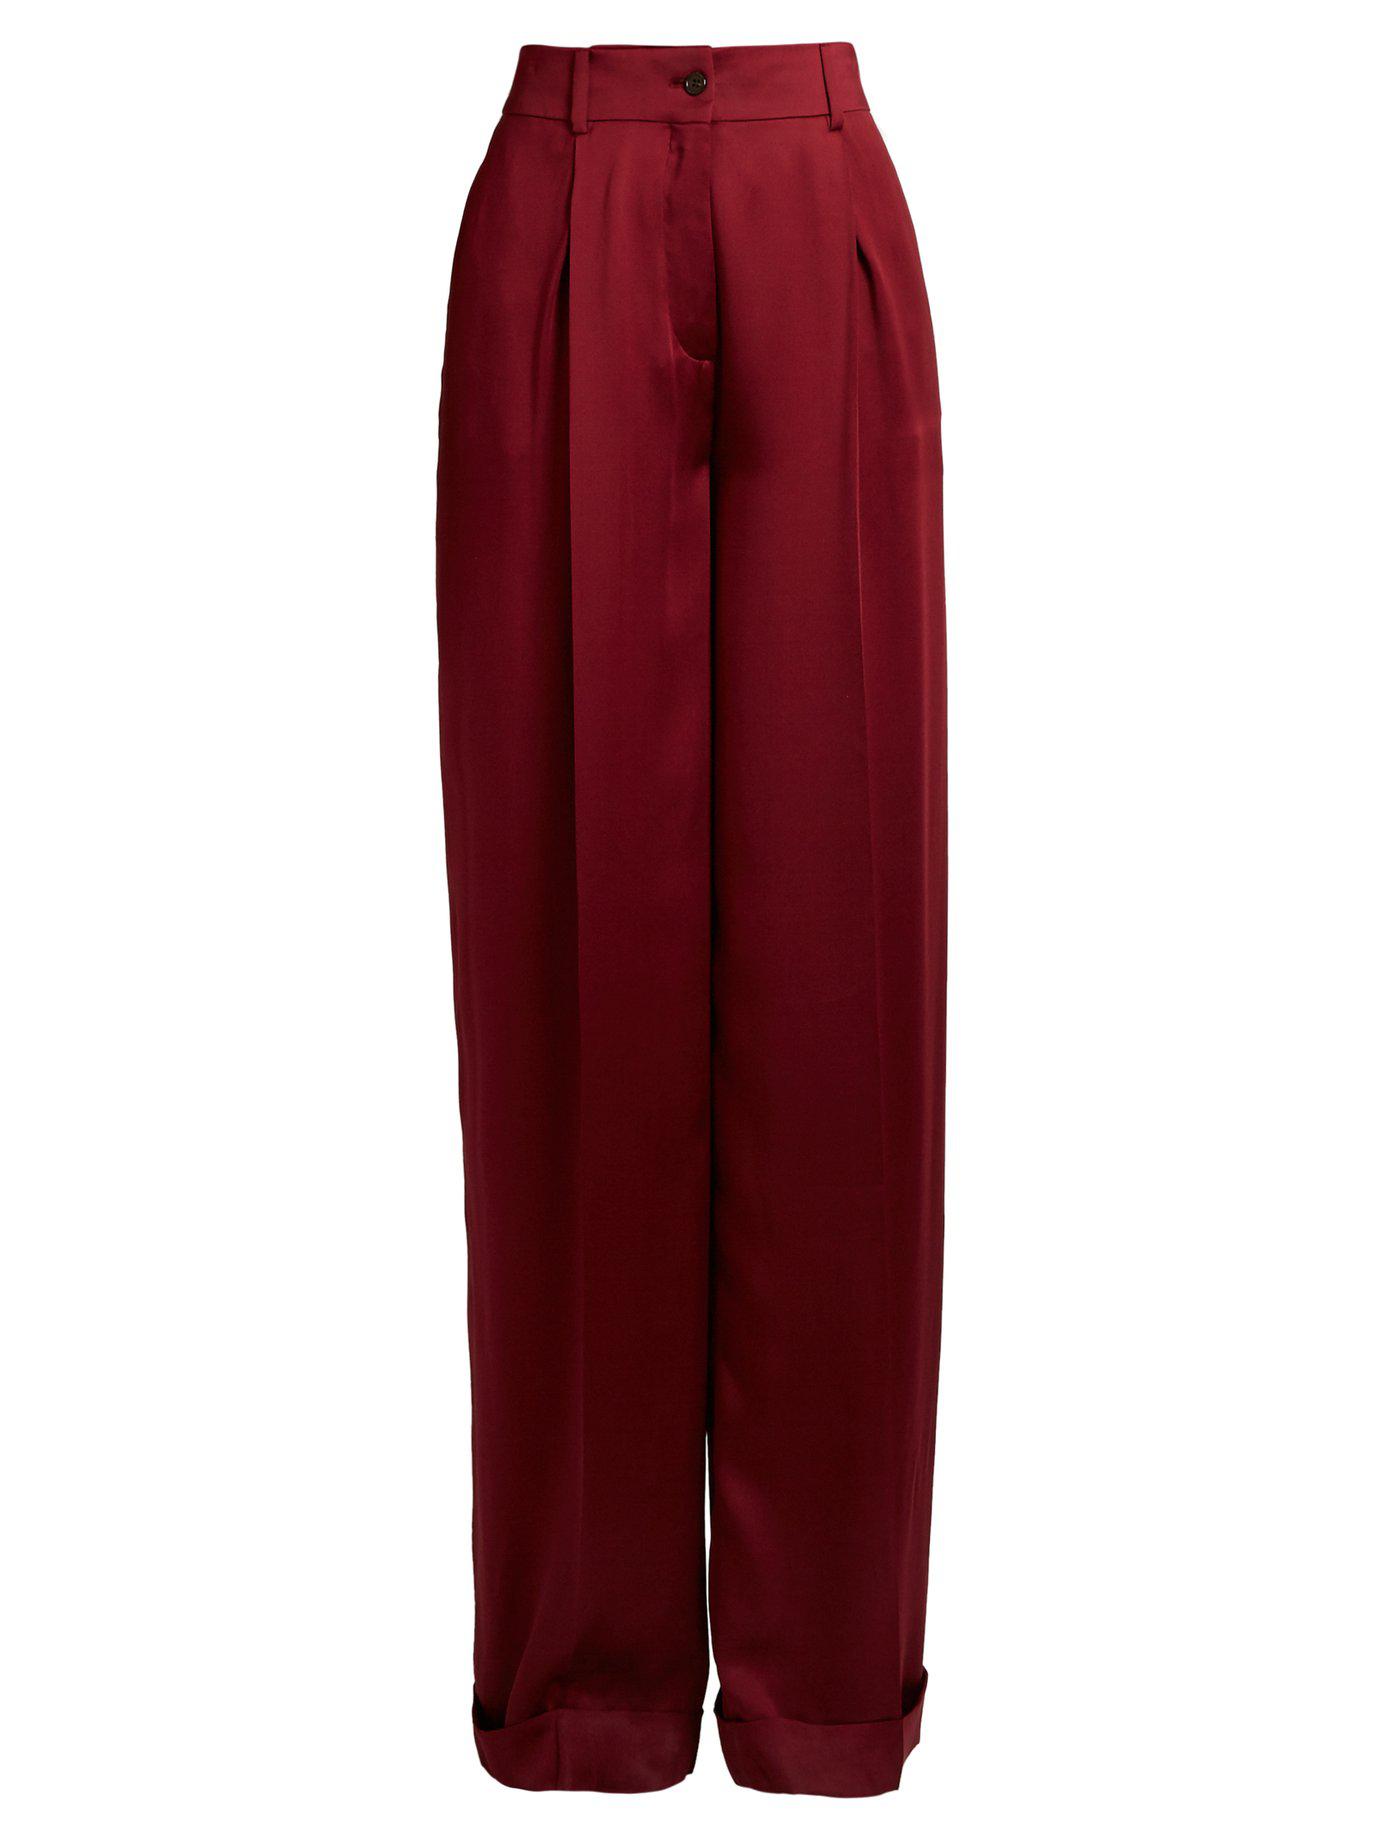 Valentino High-rise Satin Wide-leg Trousers in Burgundy (Red) - Lyst